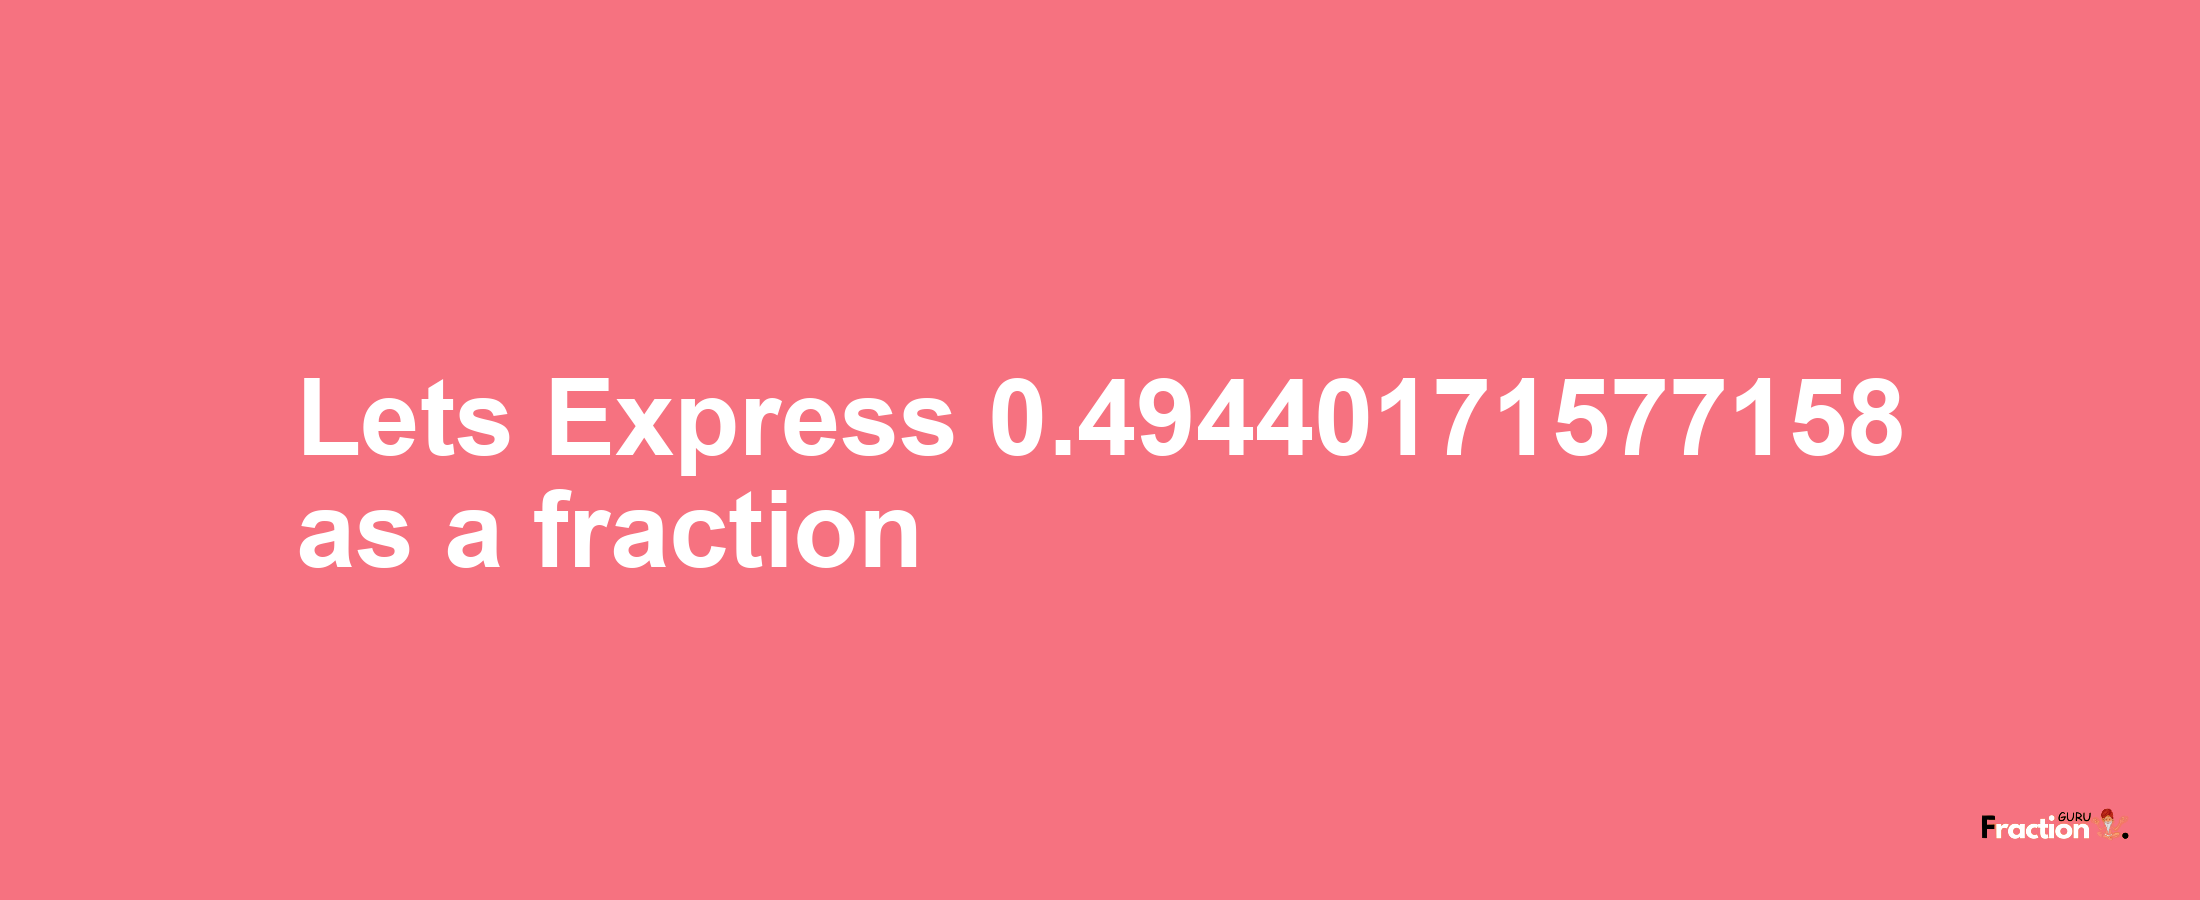 Lets Express 0.49440171577158 as afraction